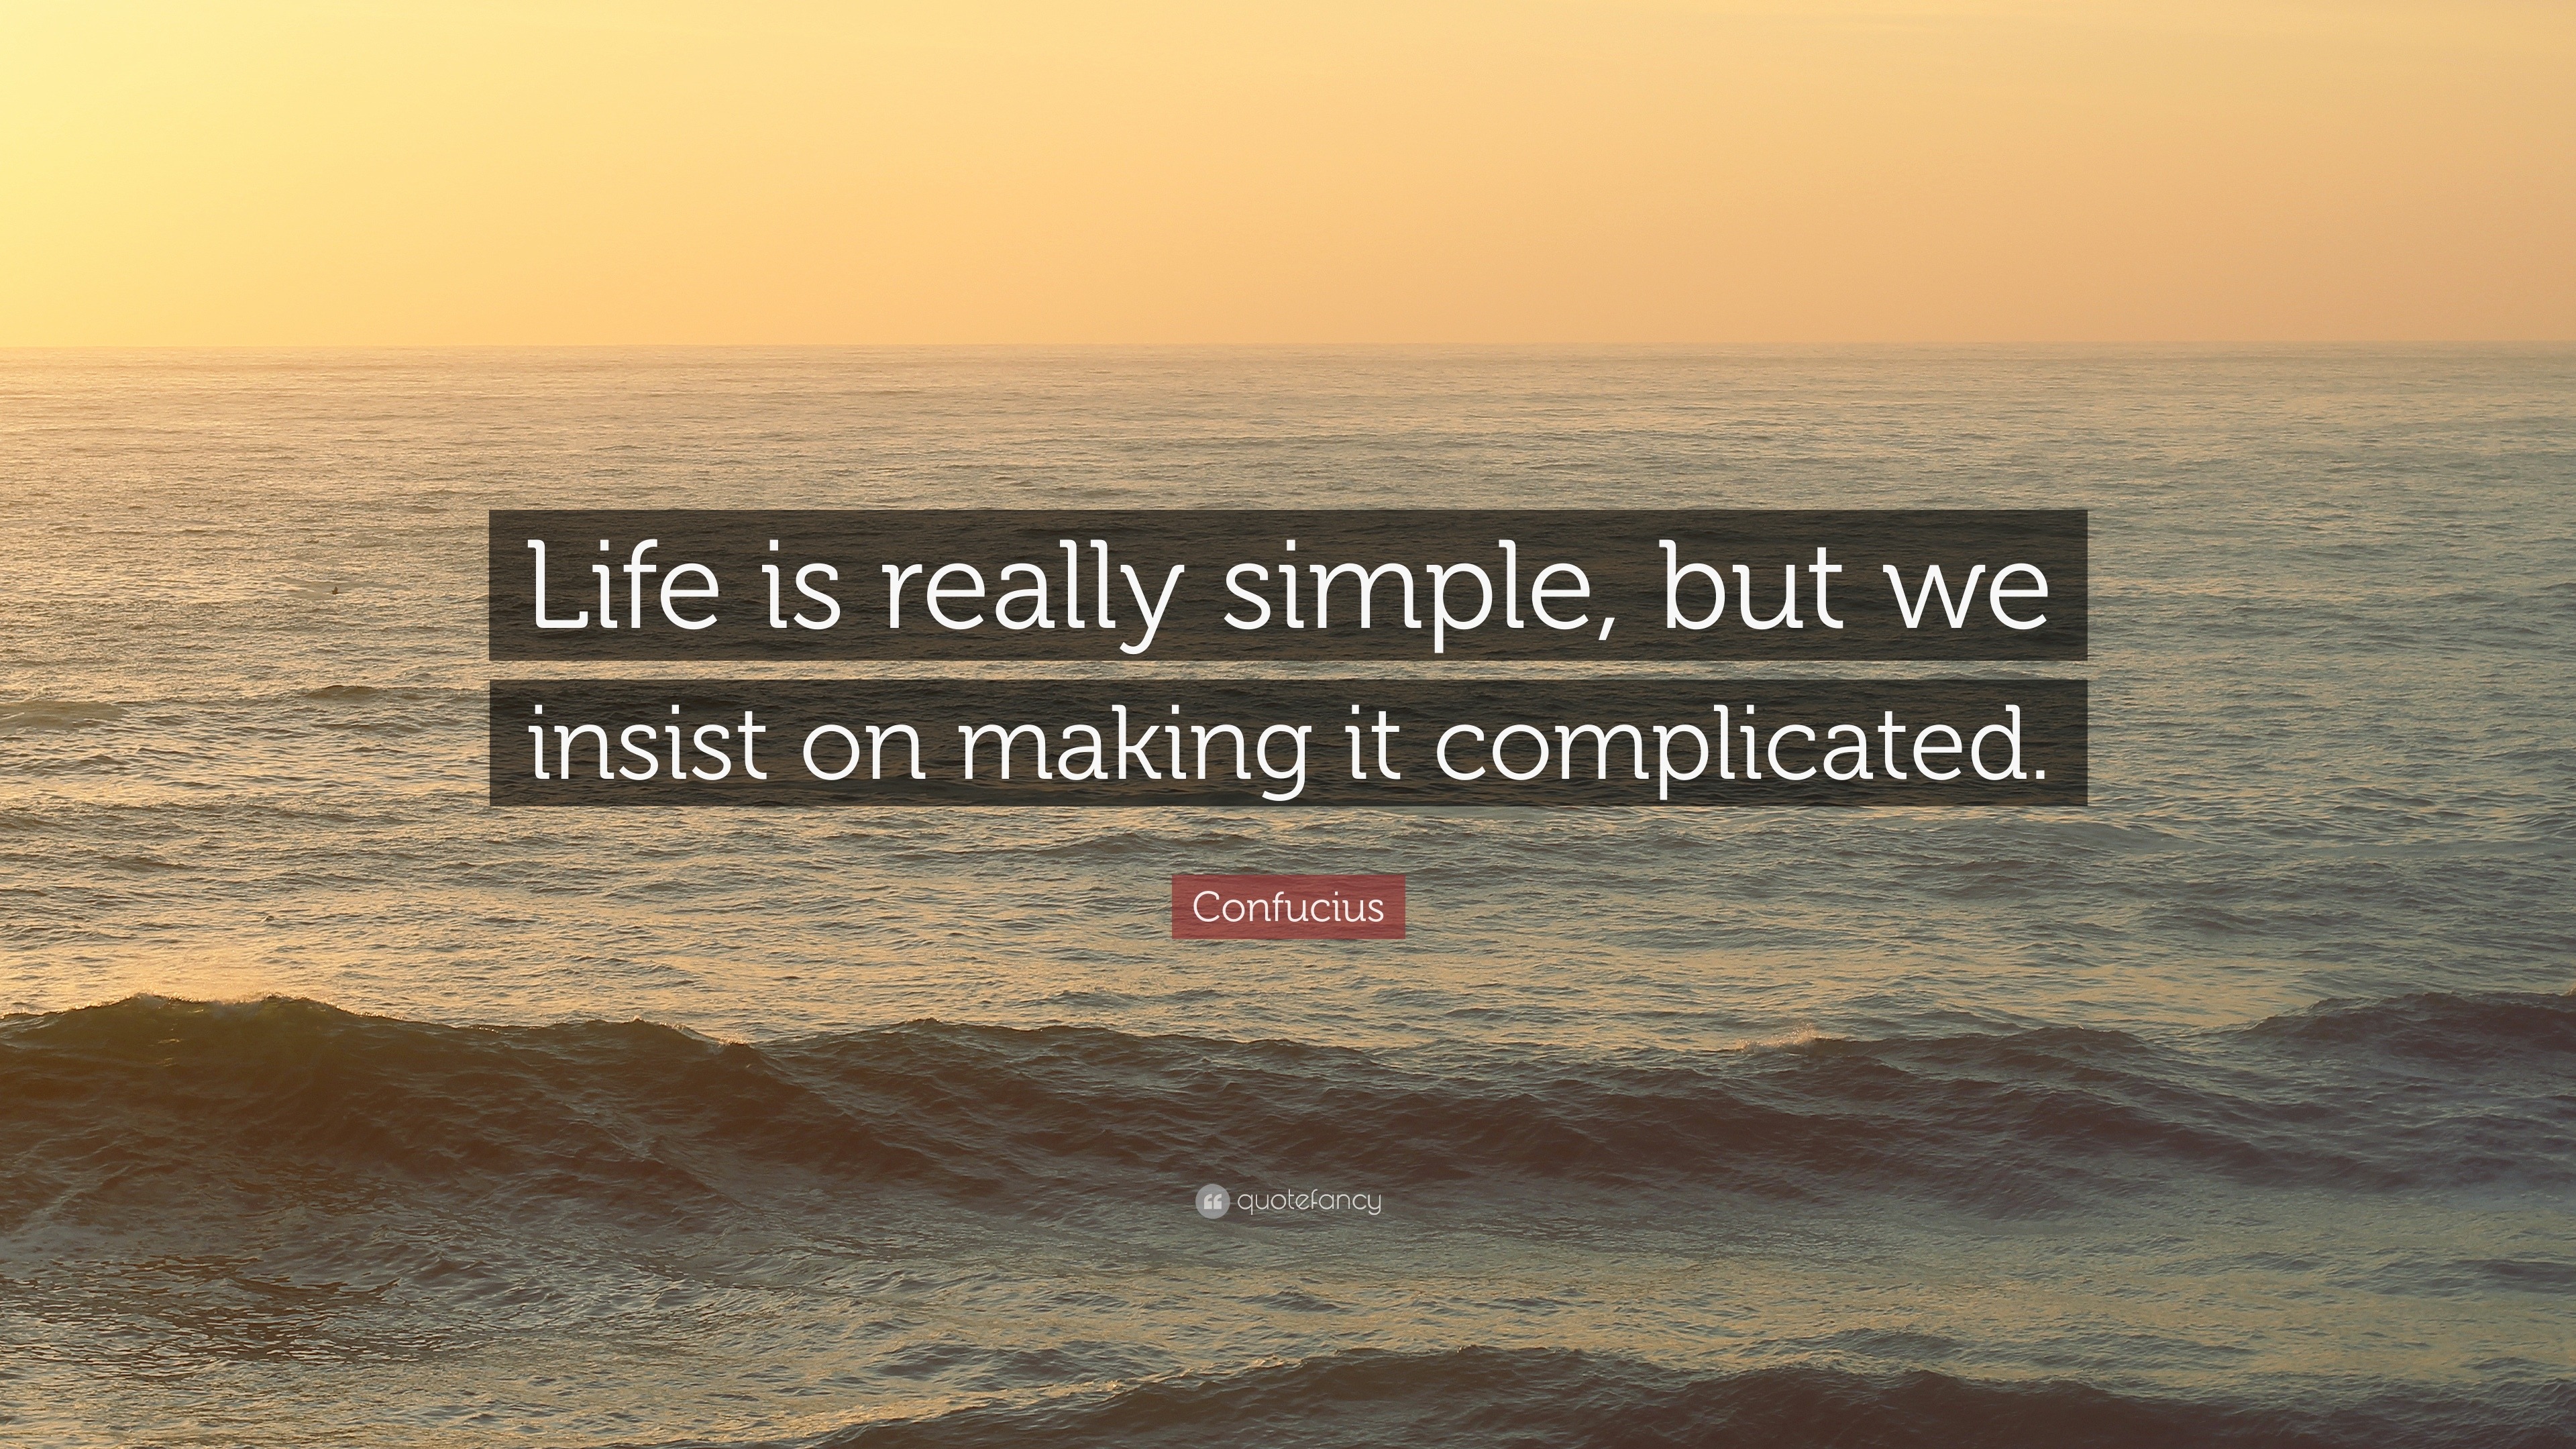 "life is really simple, but we insist on making it complicated.